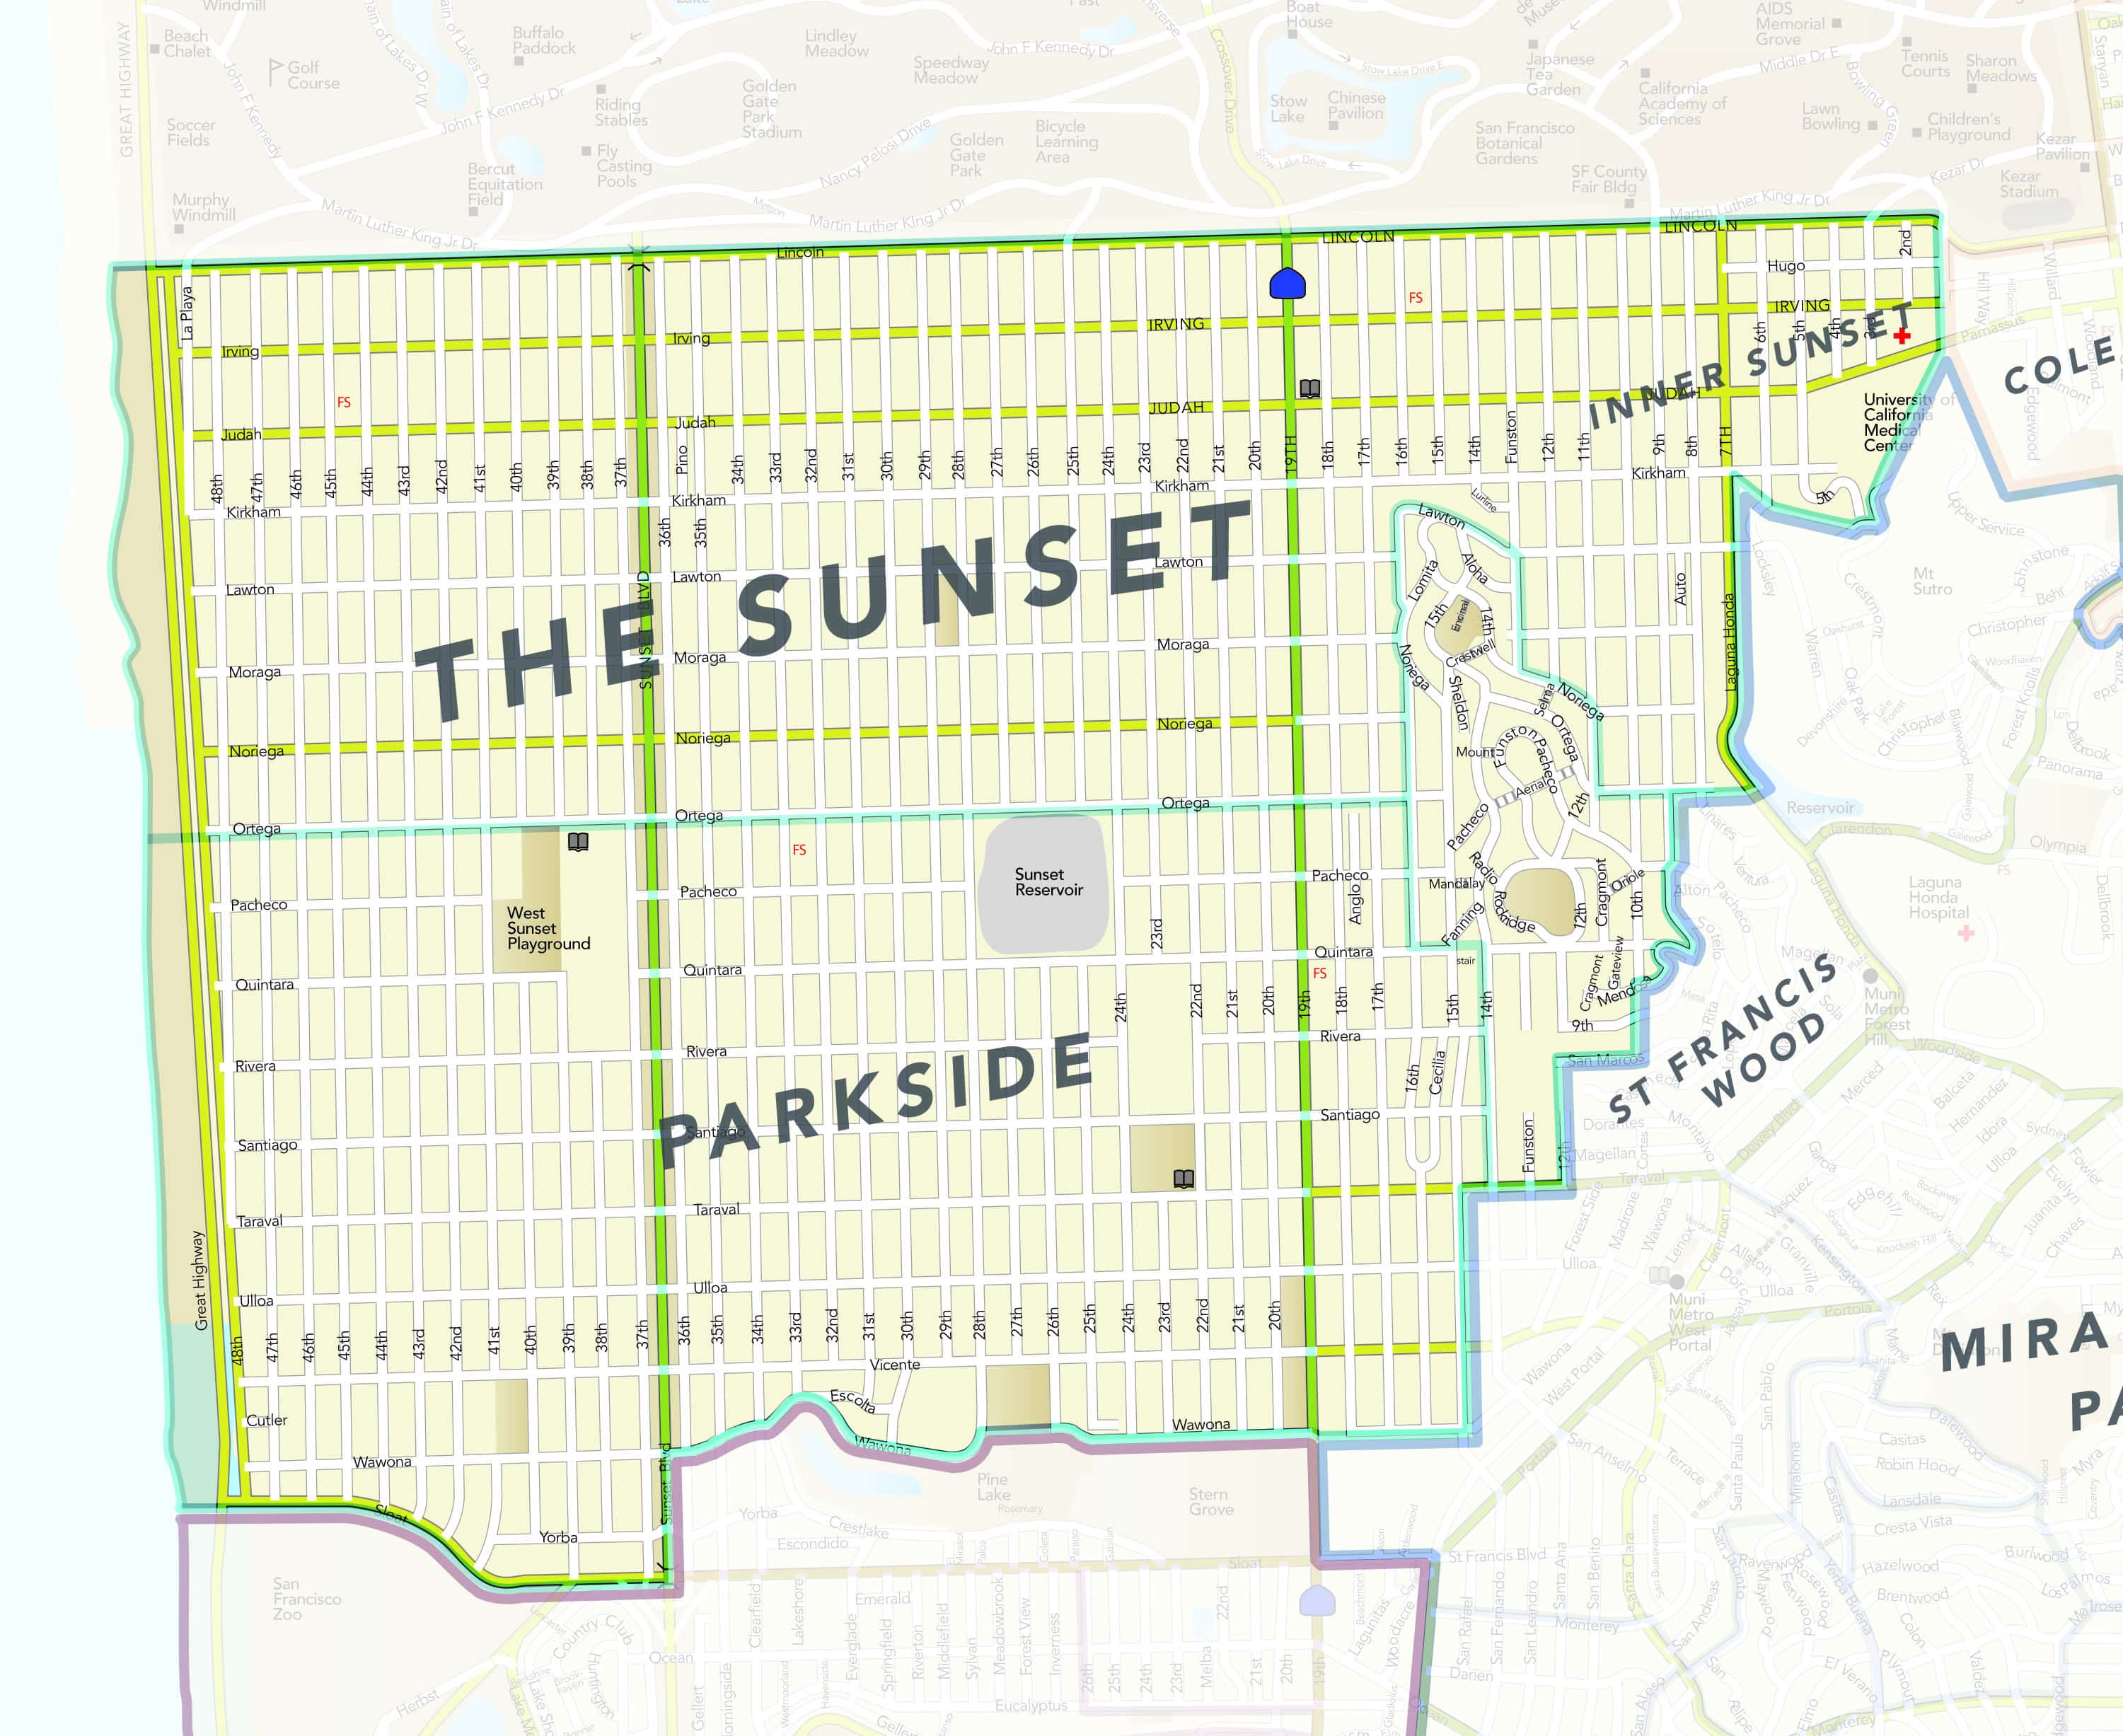 District 2: Towards the Beach, South of the Park